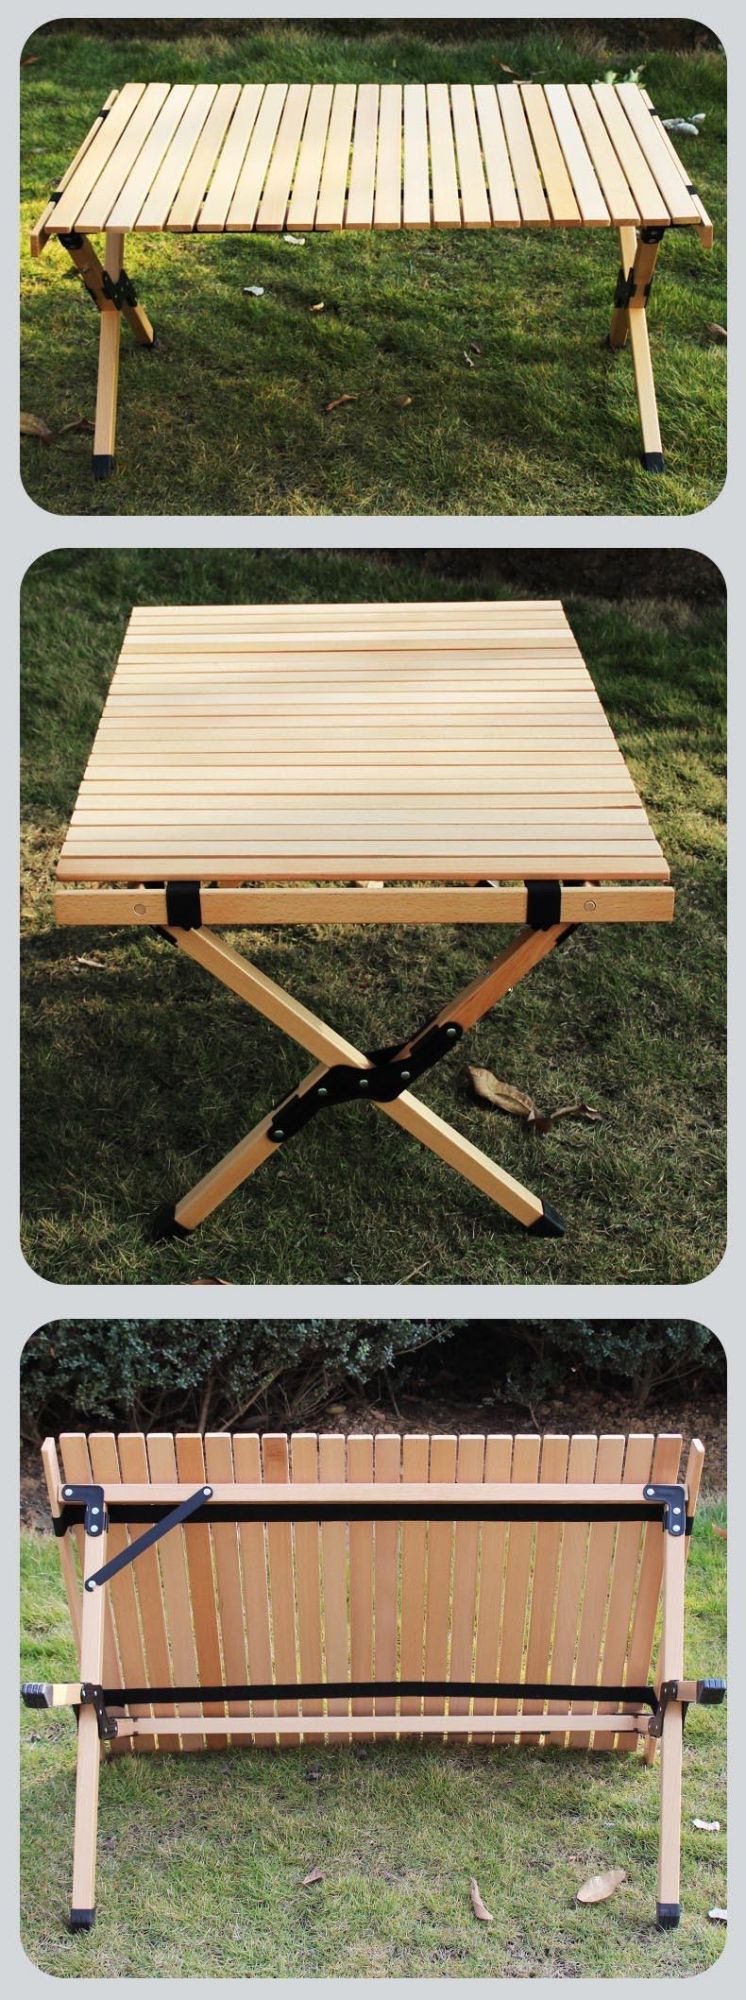 Folding Solid Wood Table Camping Portable Foldable Outdoor Picnic Table Egg Roll Wooden Table